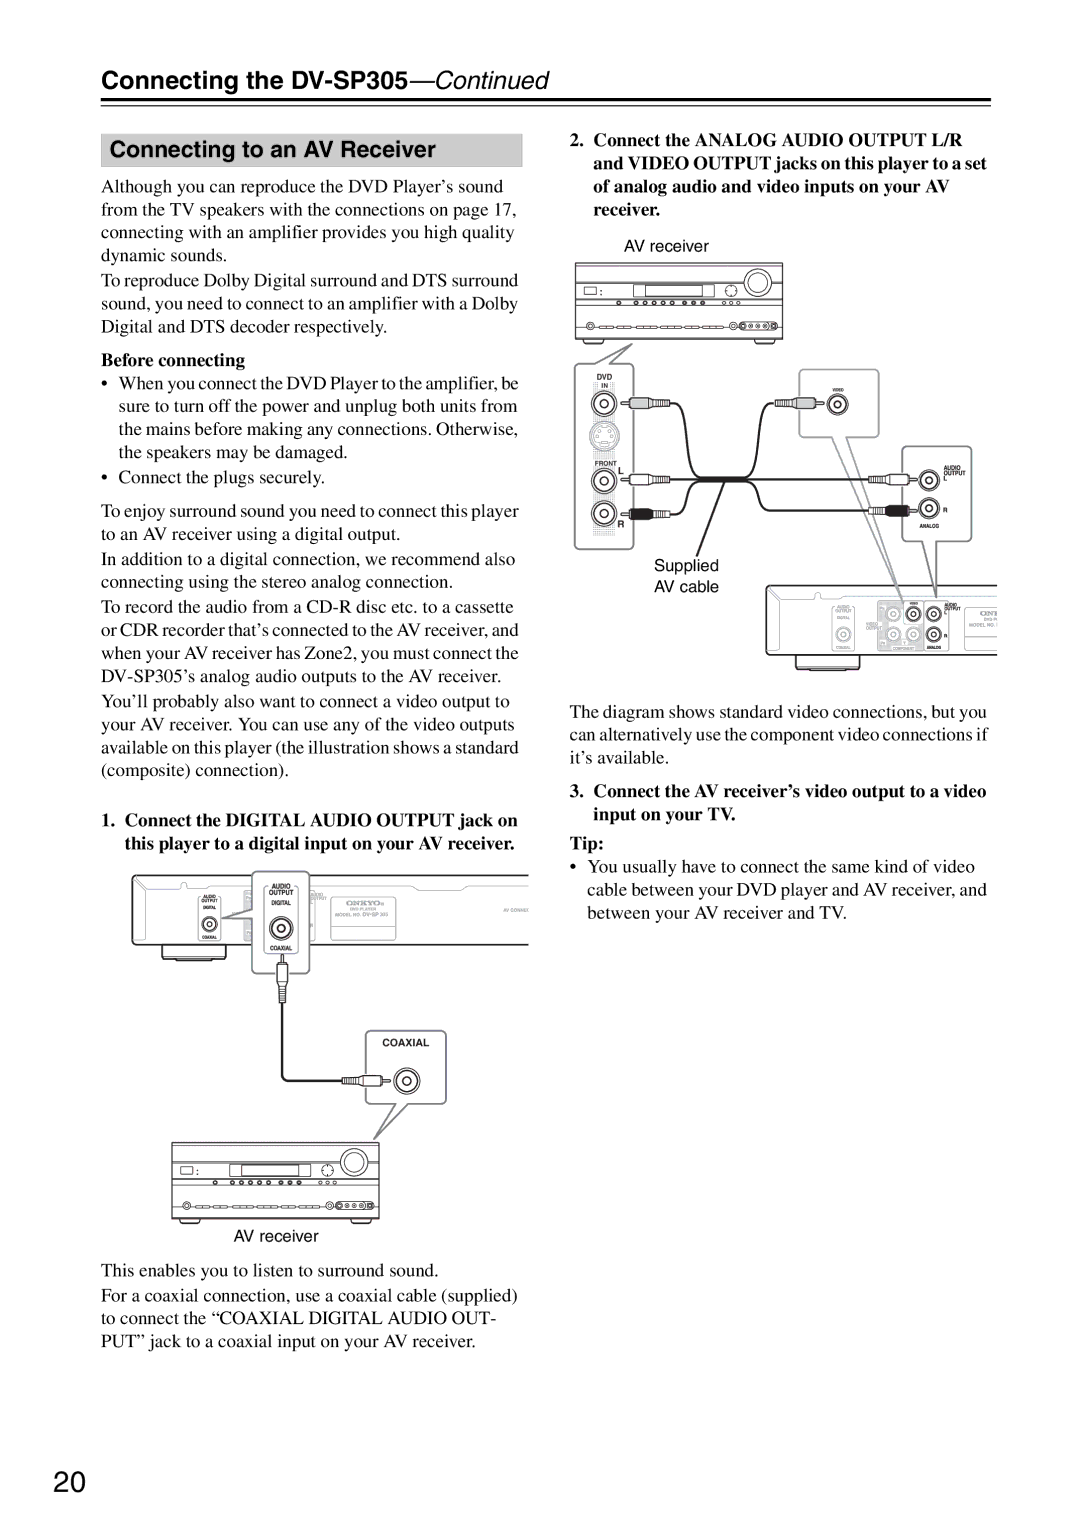 Onkyo DV-SP305 instruction manual Connecting to an AV Receiver, Before connecting 